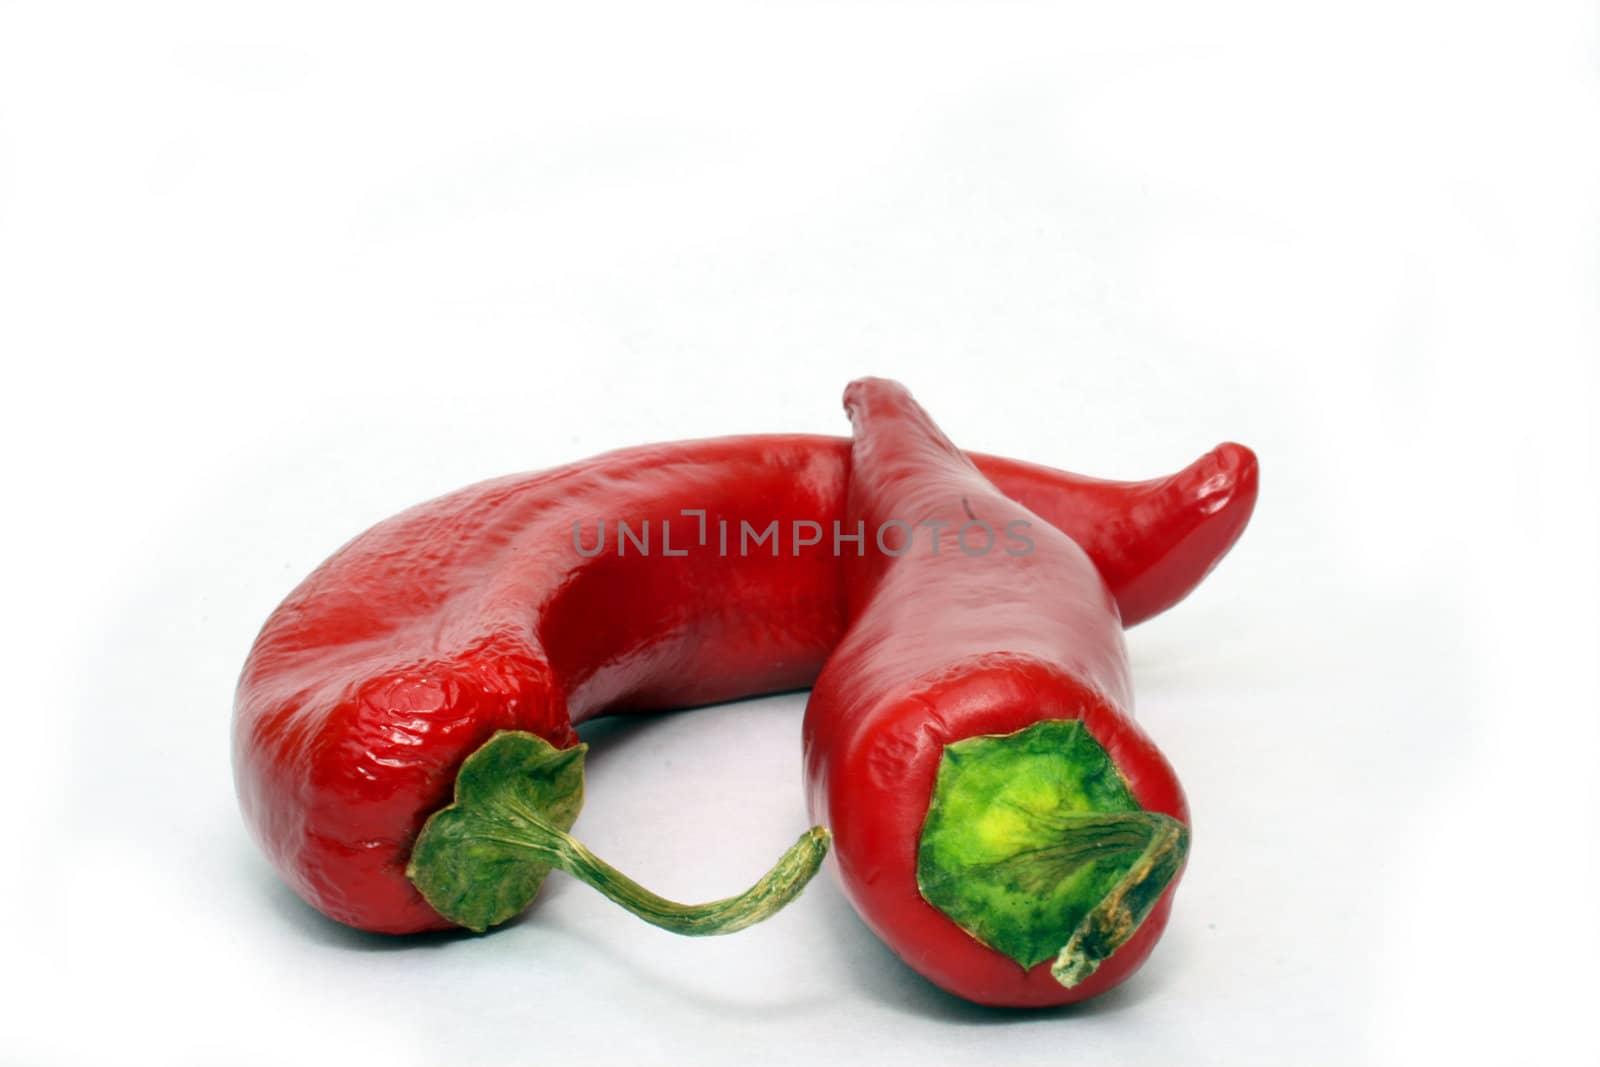 Two red chili peppers on white background